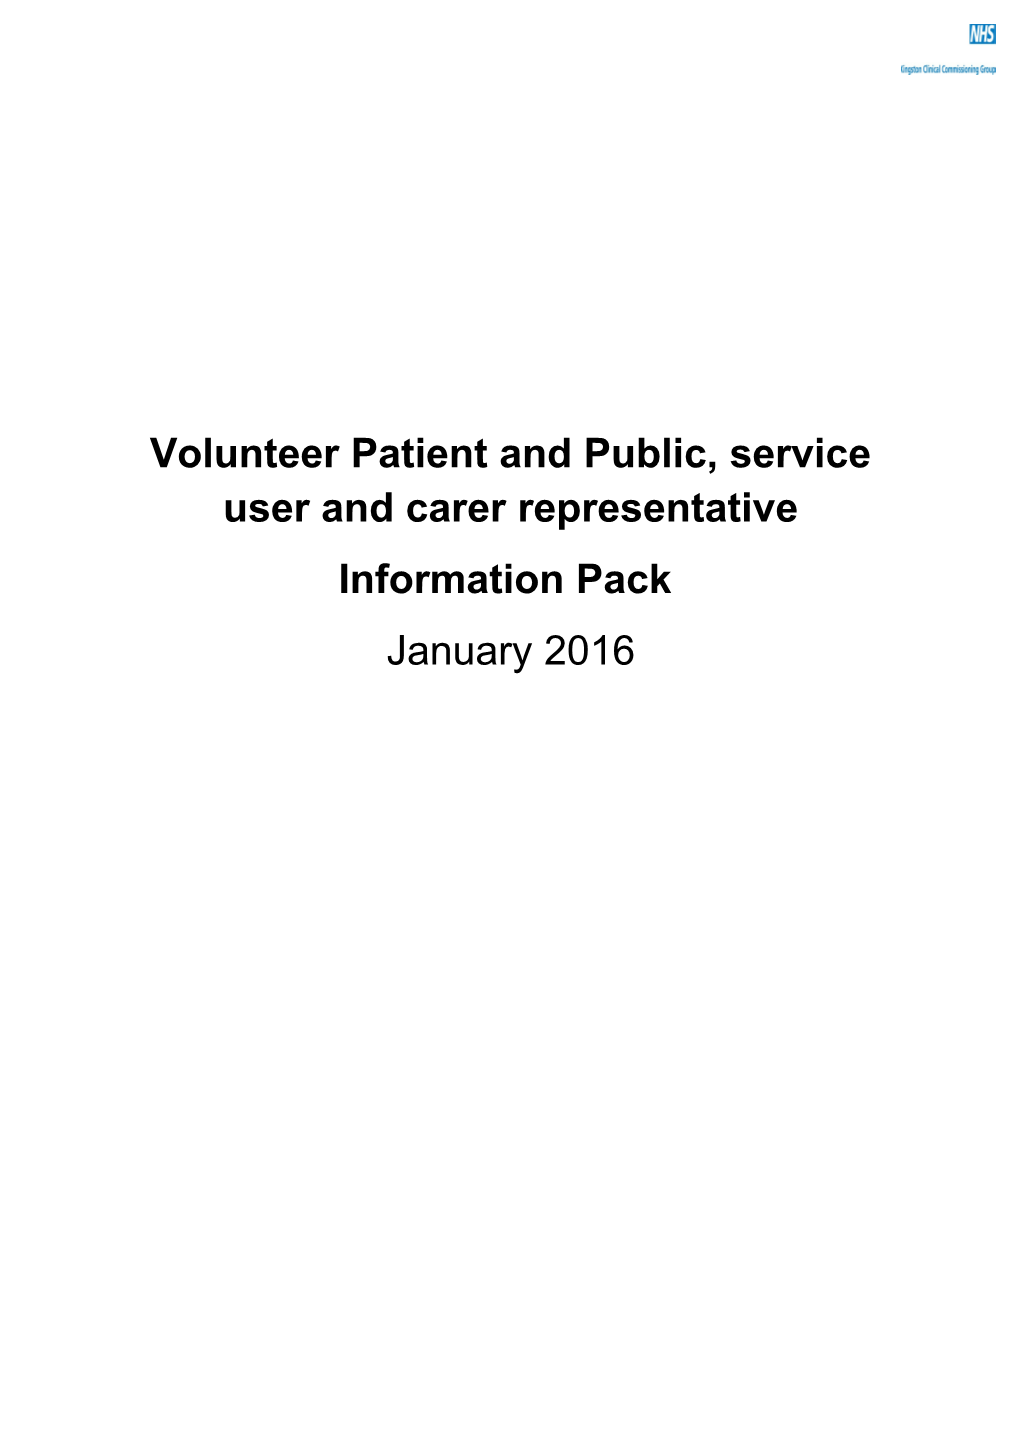 Volunteer Patient and Public, Service User and Carer Representative